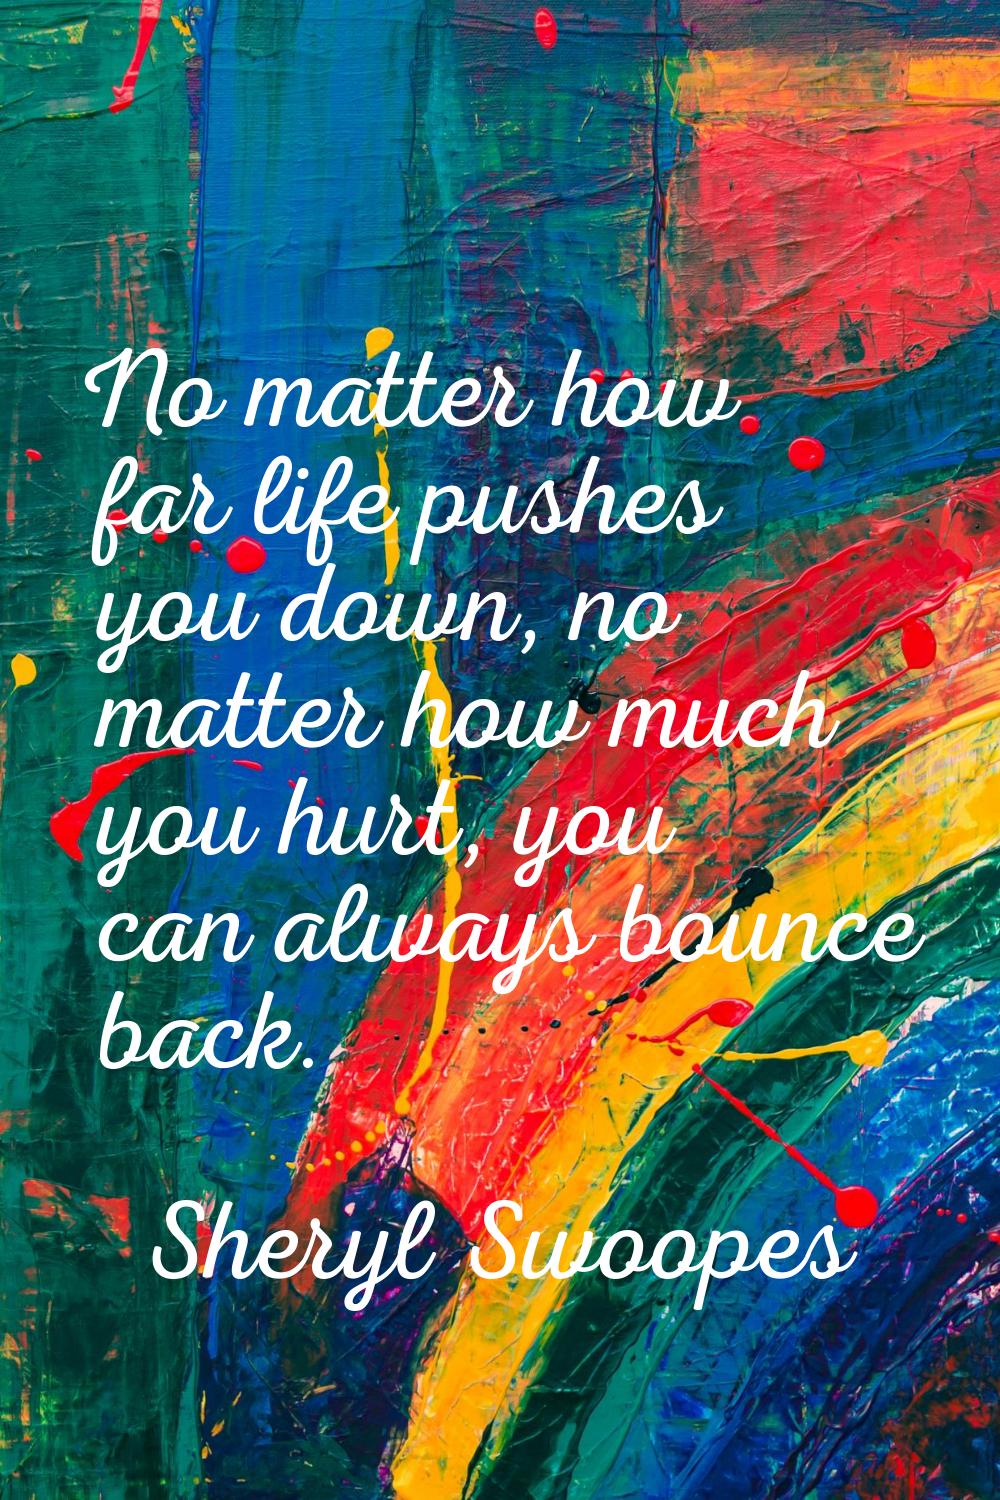 No matter how far life pushes you down, no matter how much you hurt, you can always bounce back.